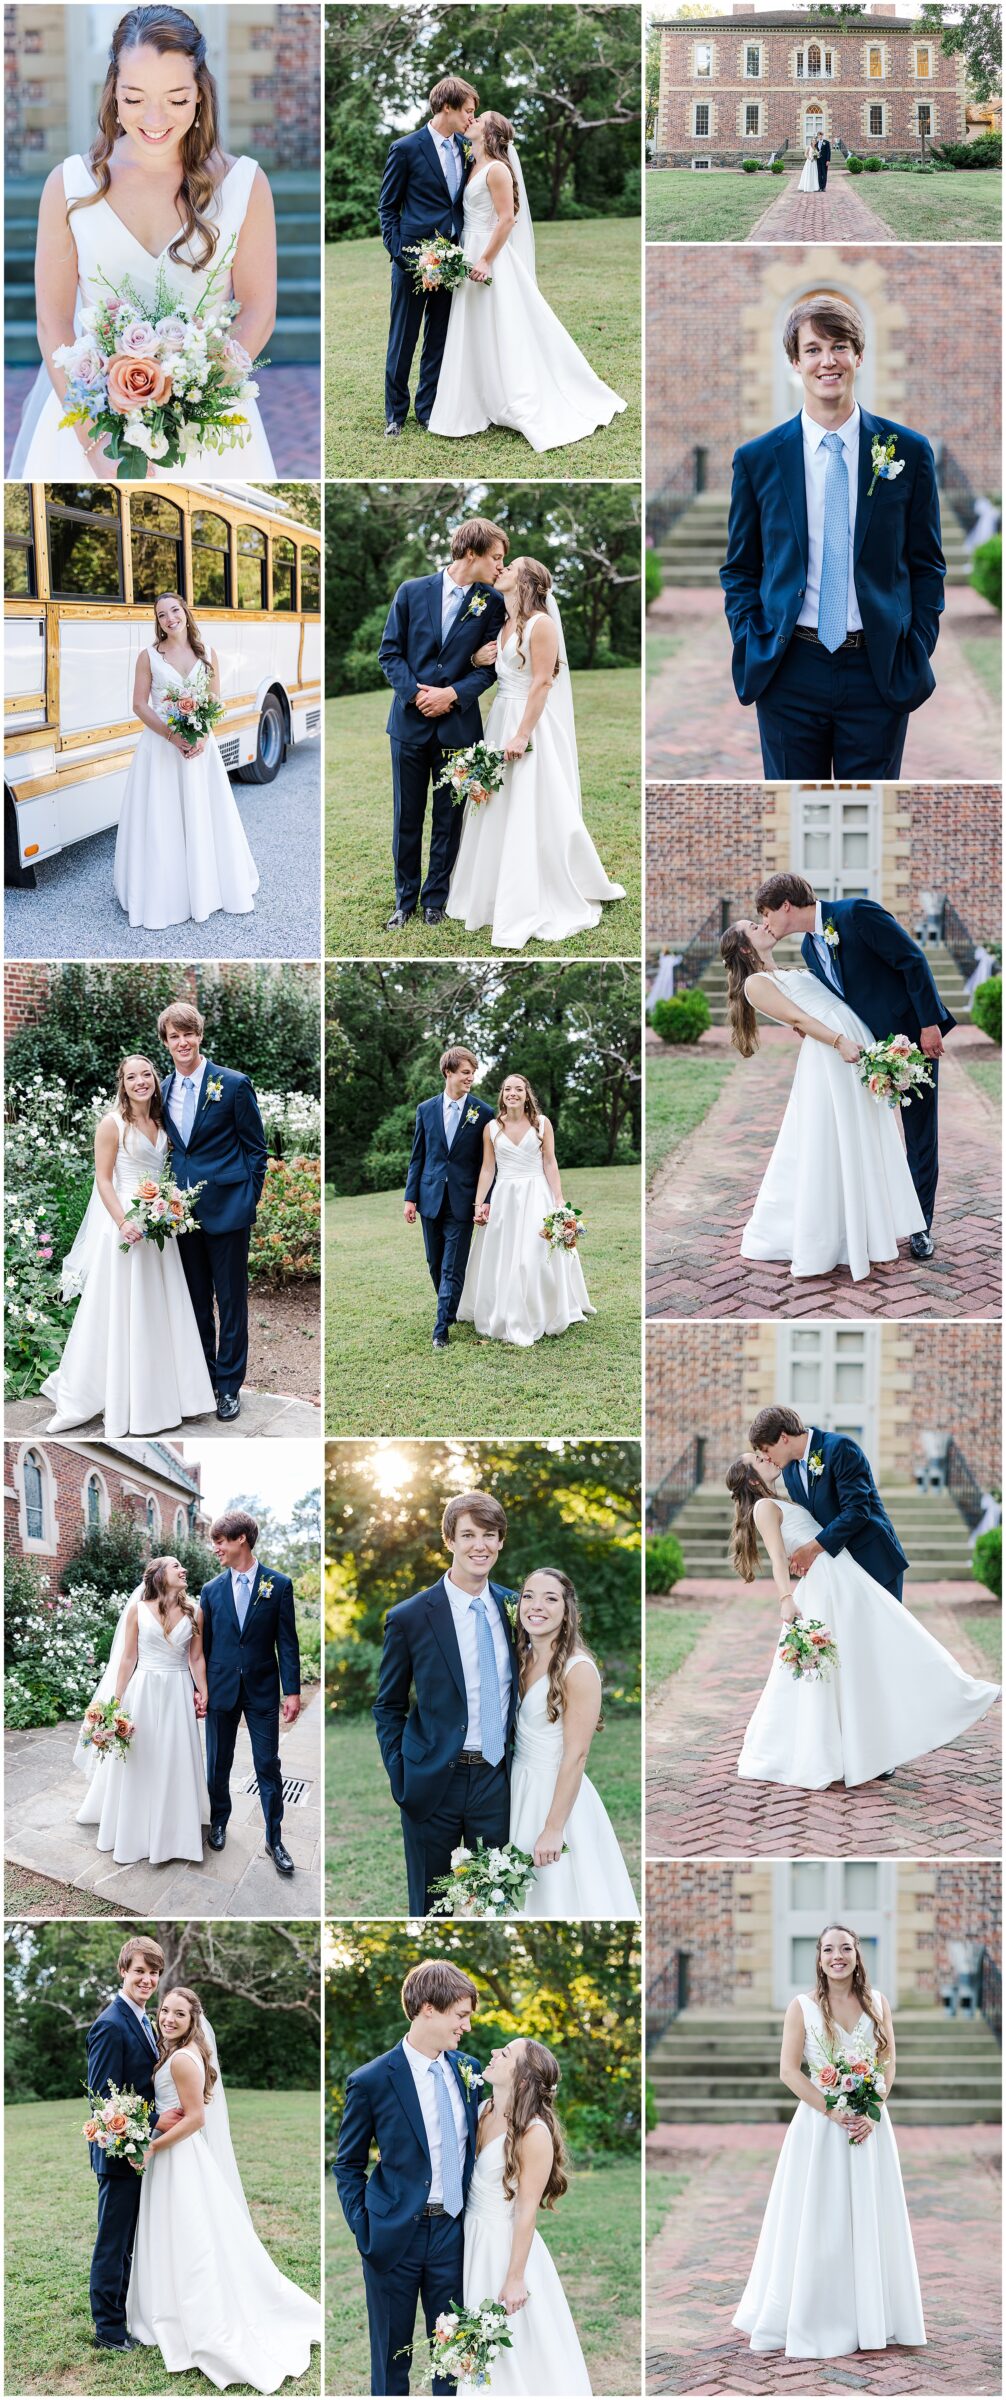 collage of bride and groom portraits outdoors by Richmond VA wedding photographer